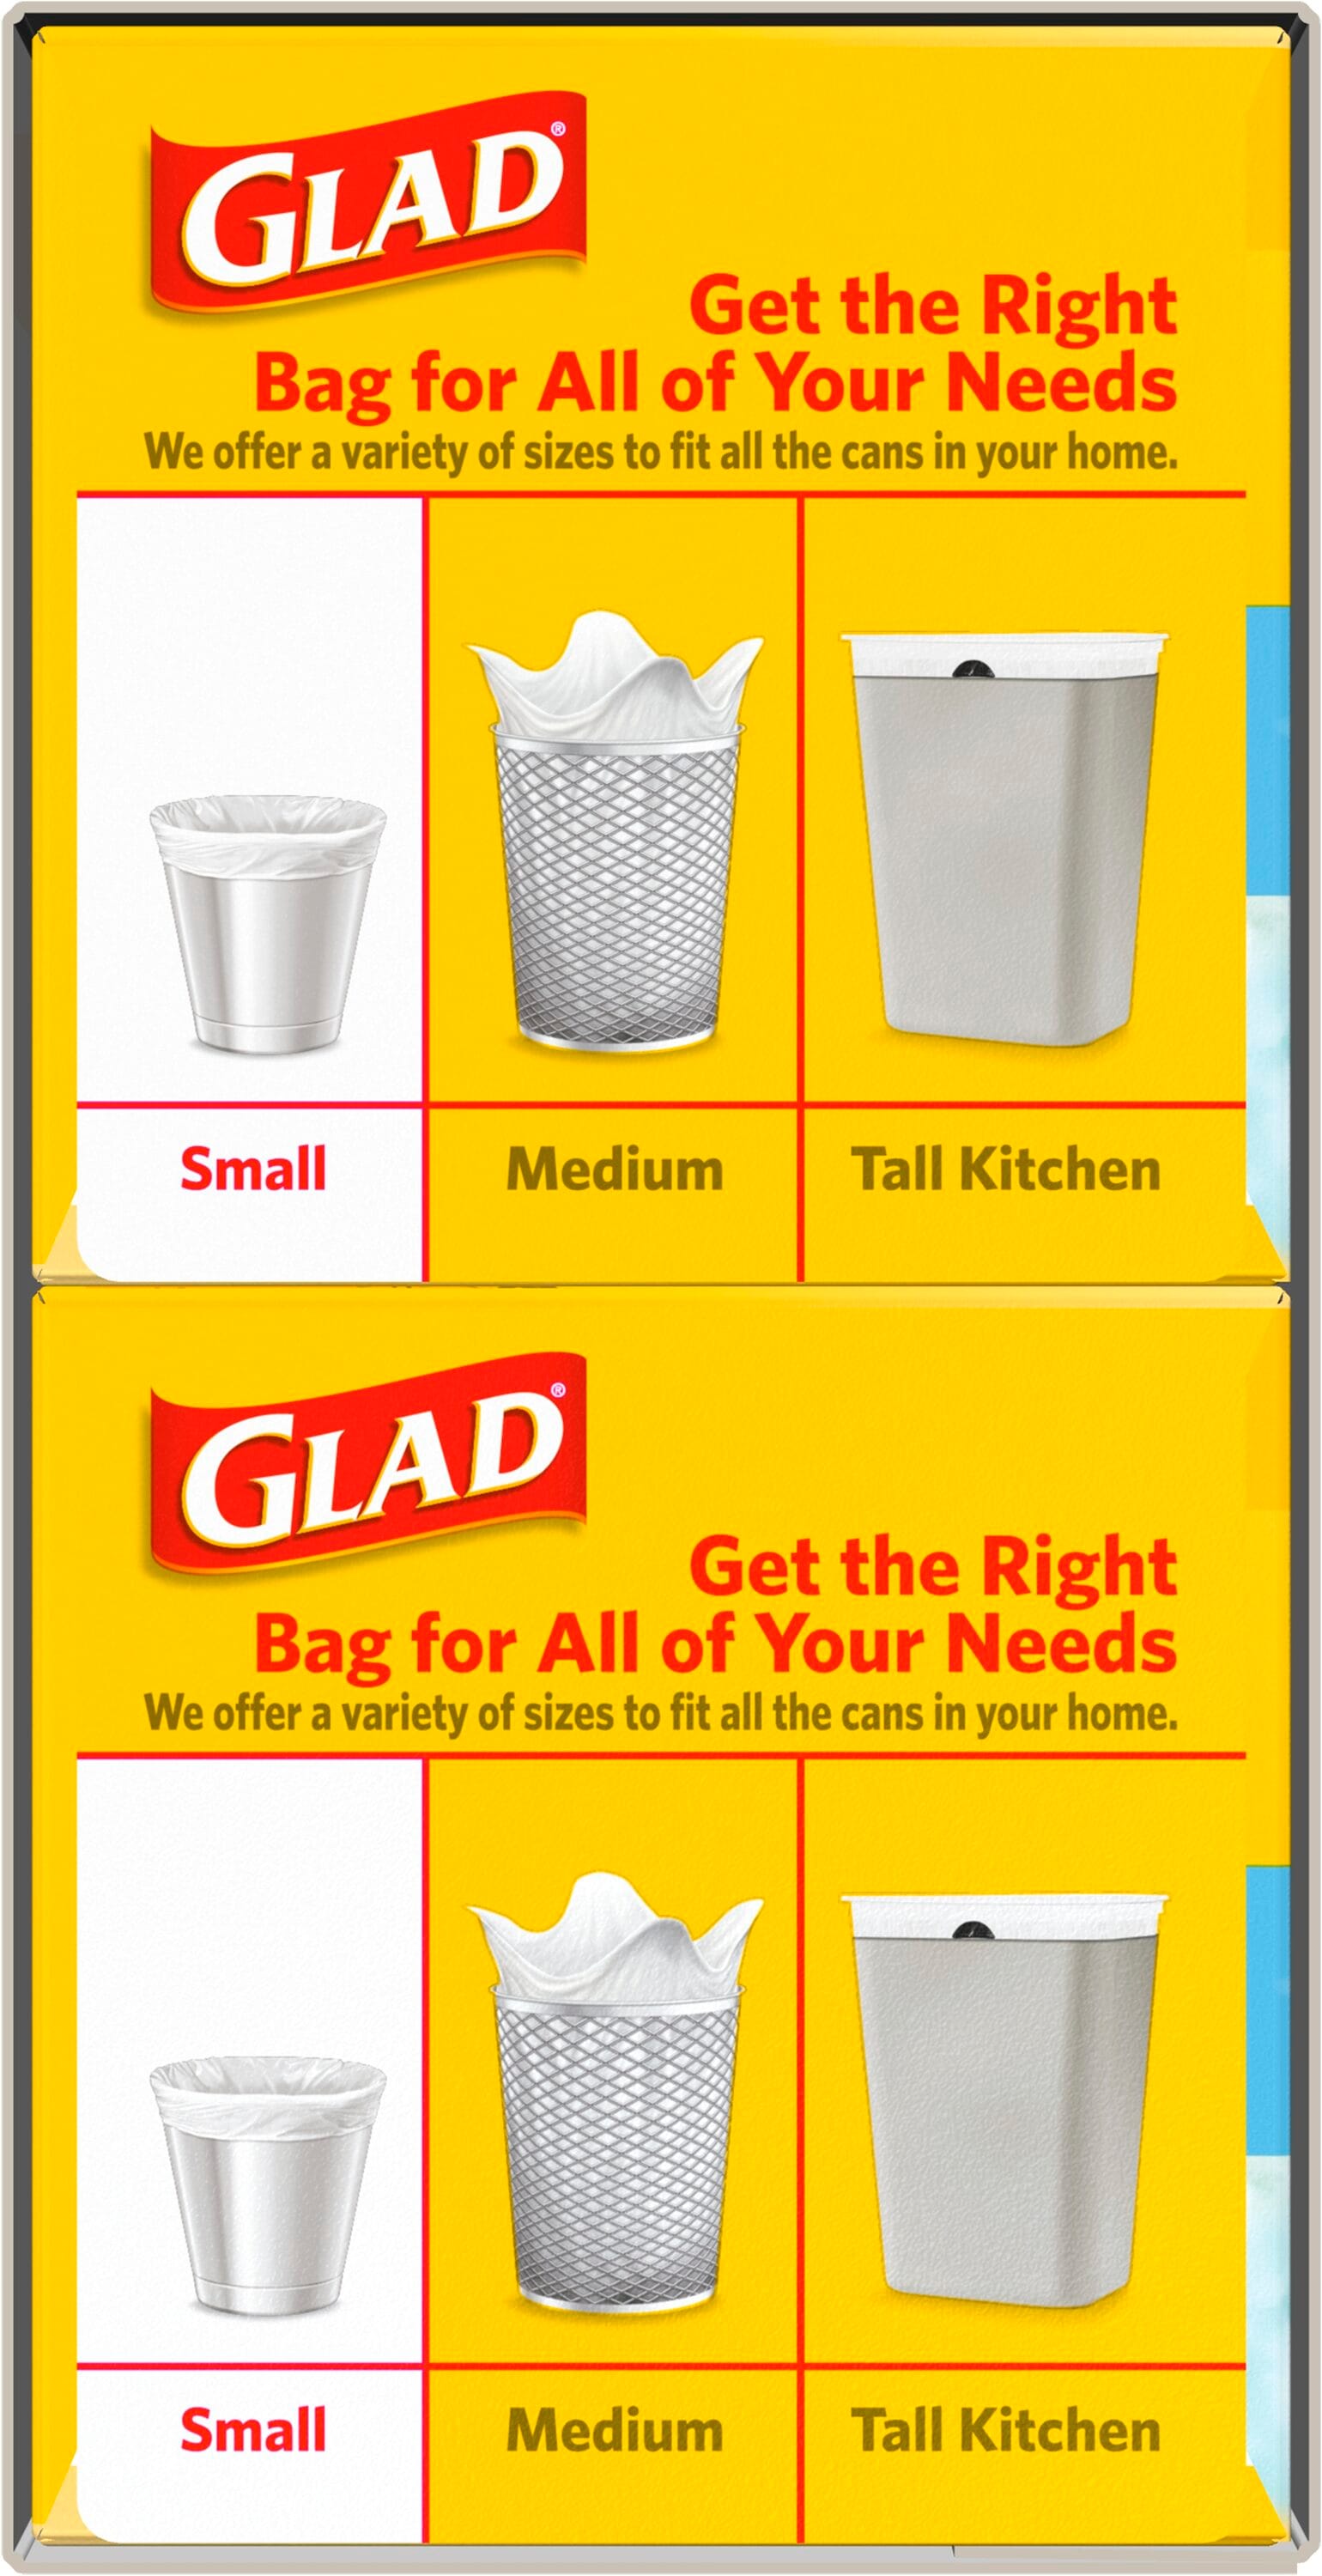 Glad 6498463 Febreze 4 gal Trash Bags Quick Tie, White - Pack of